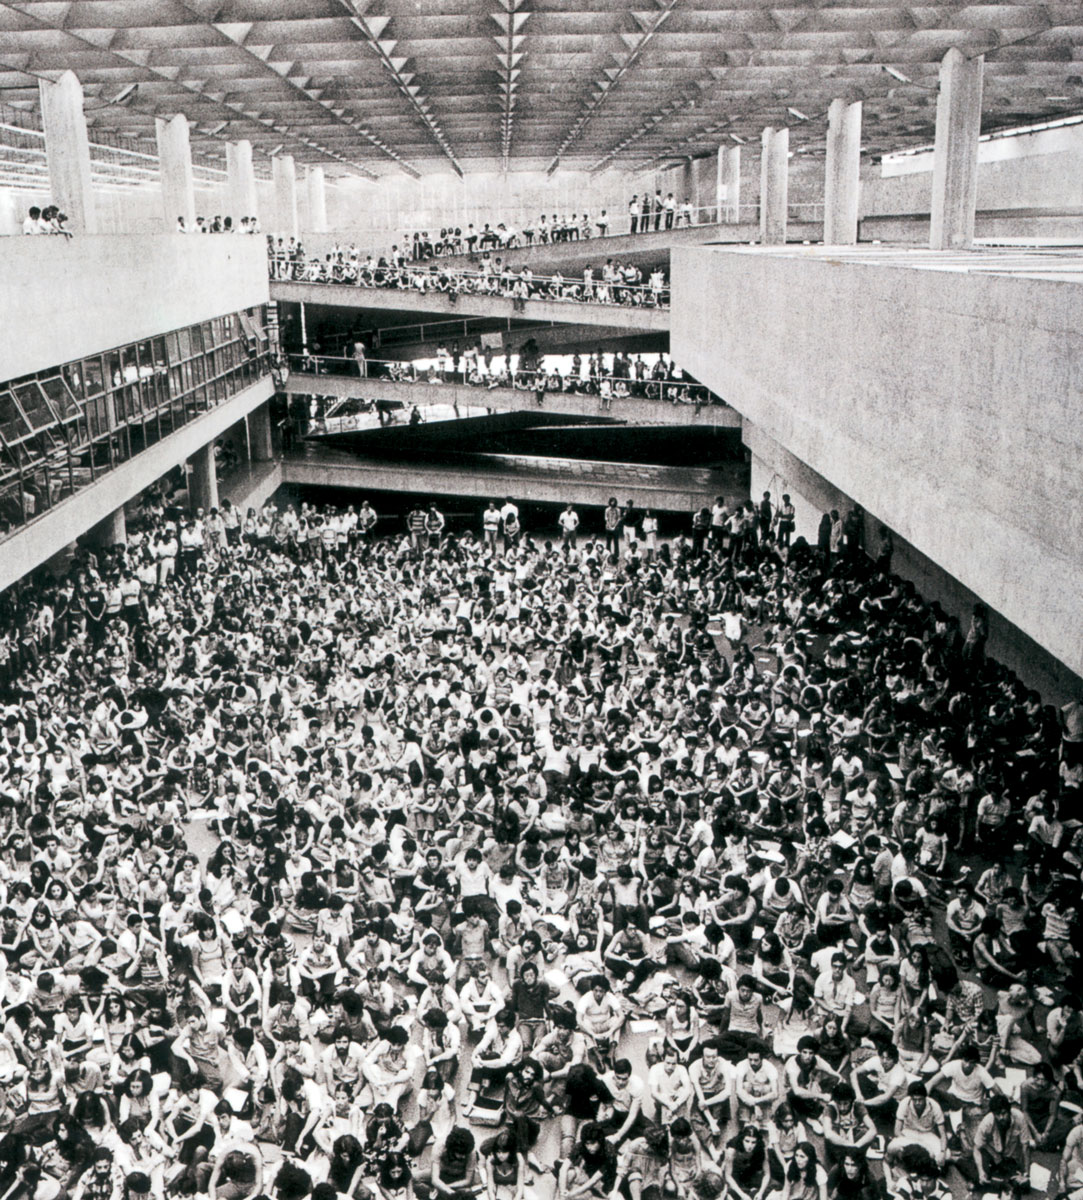 Interior space of FAU, probably from 1969.